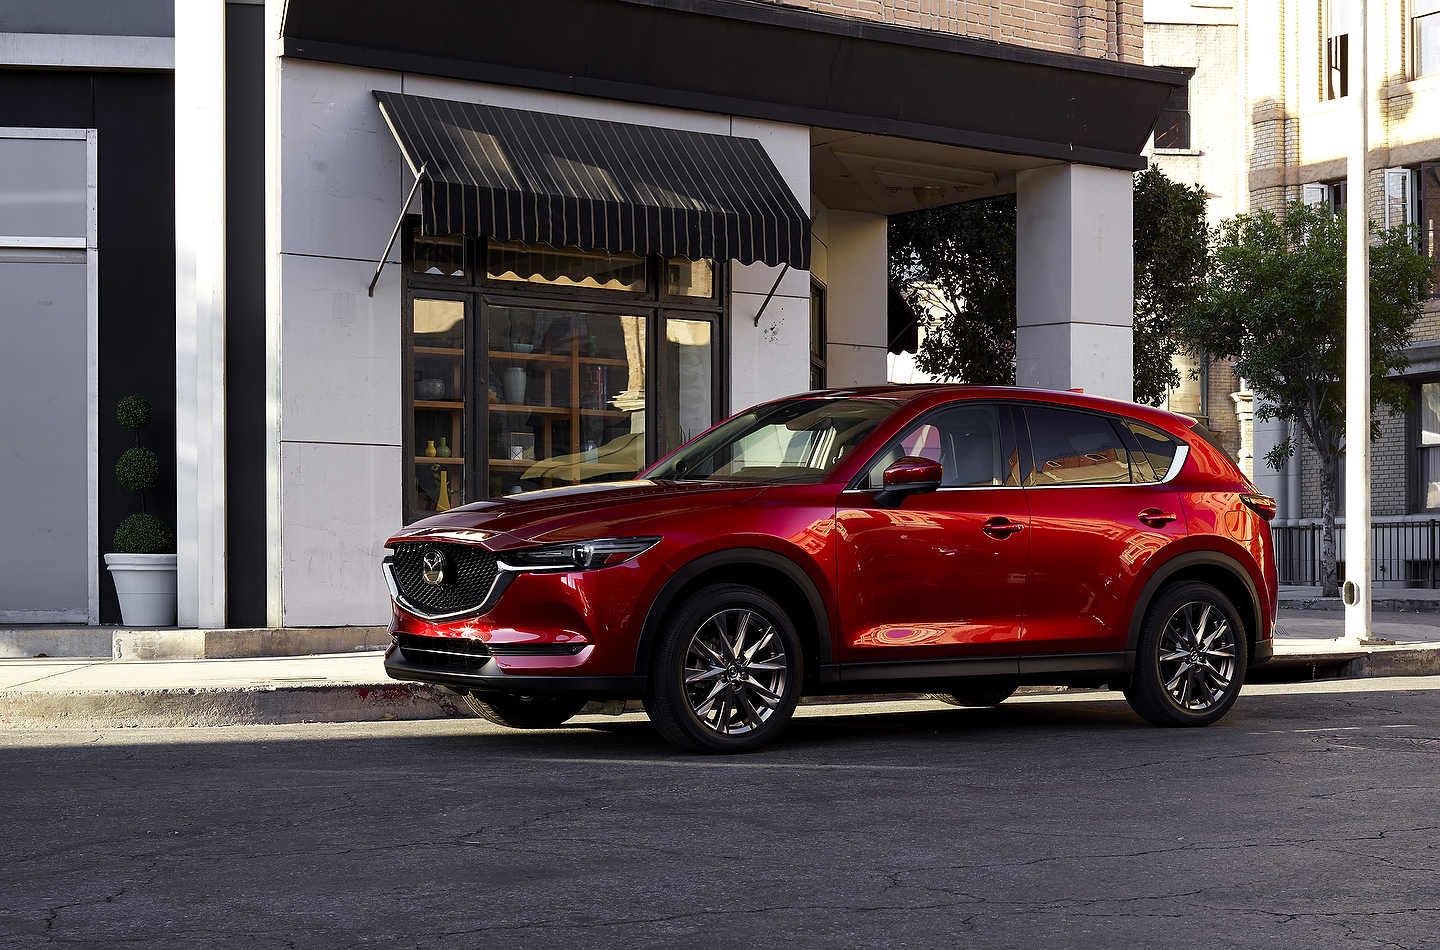 Mazda CX-5 Named To Car and Driver’s 10Best List Once Again